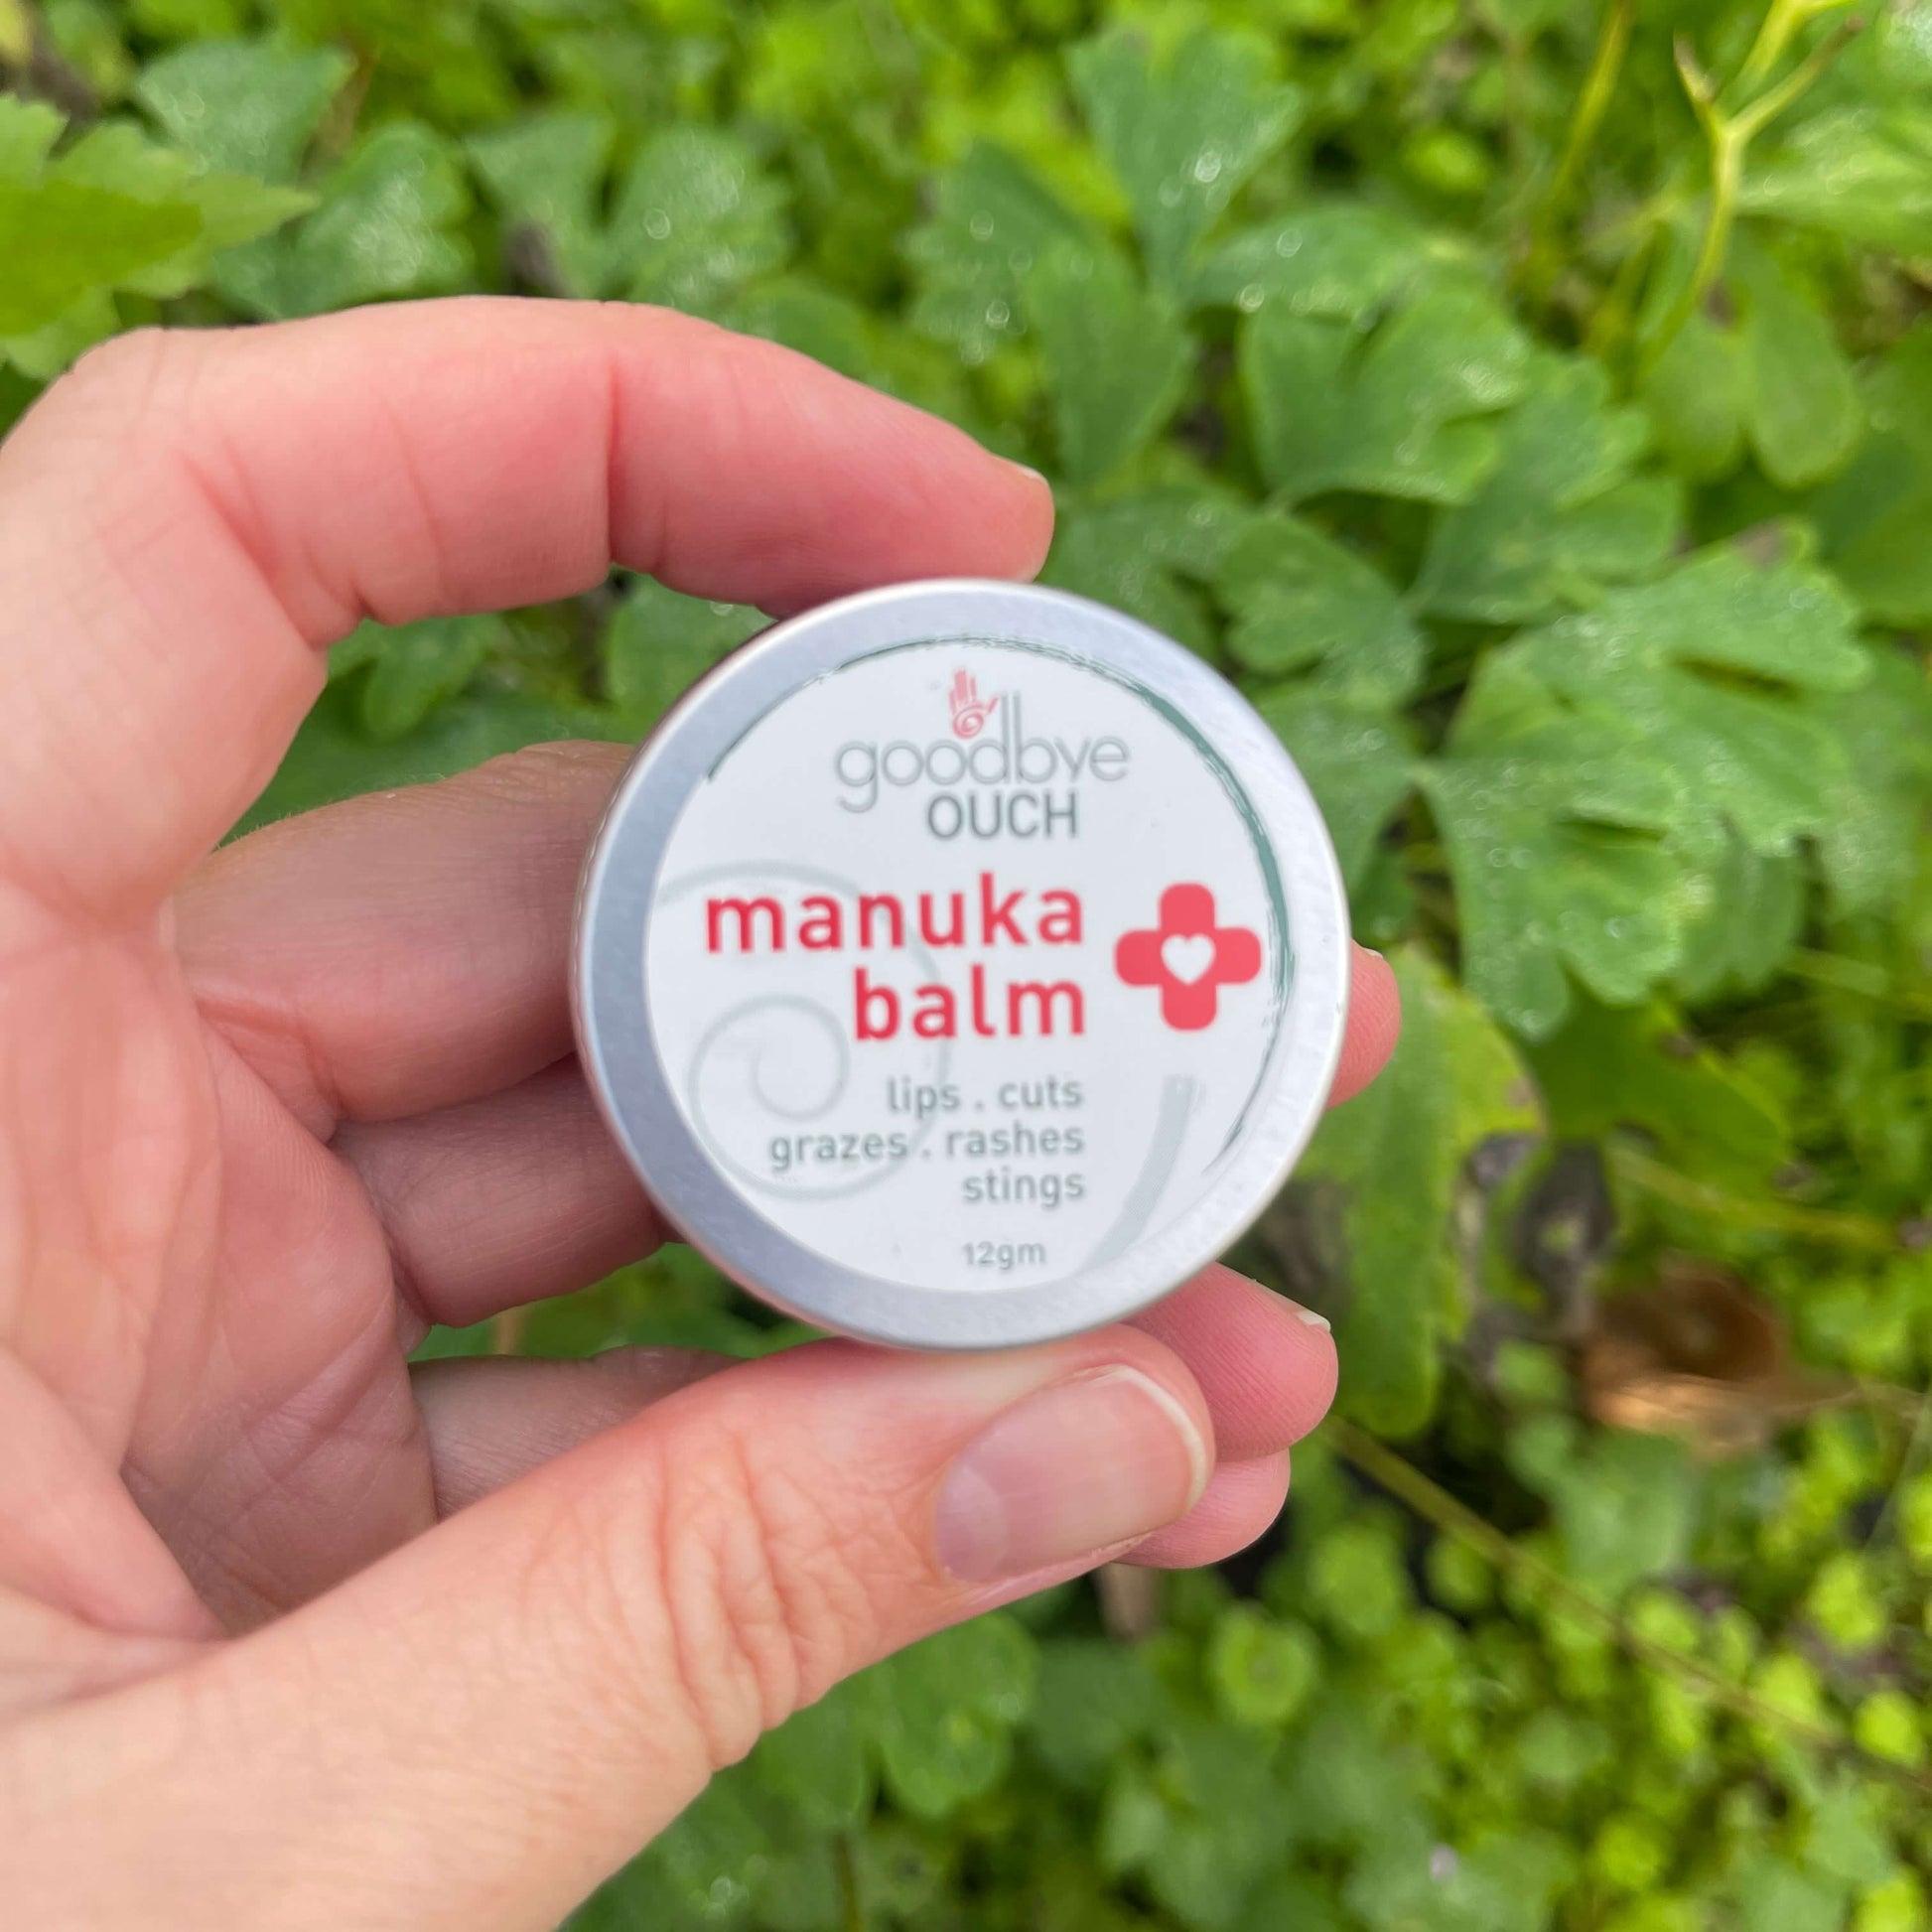 Persons hand holding a small tin of Manuka Balm by Goodbye Ouch.